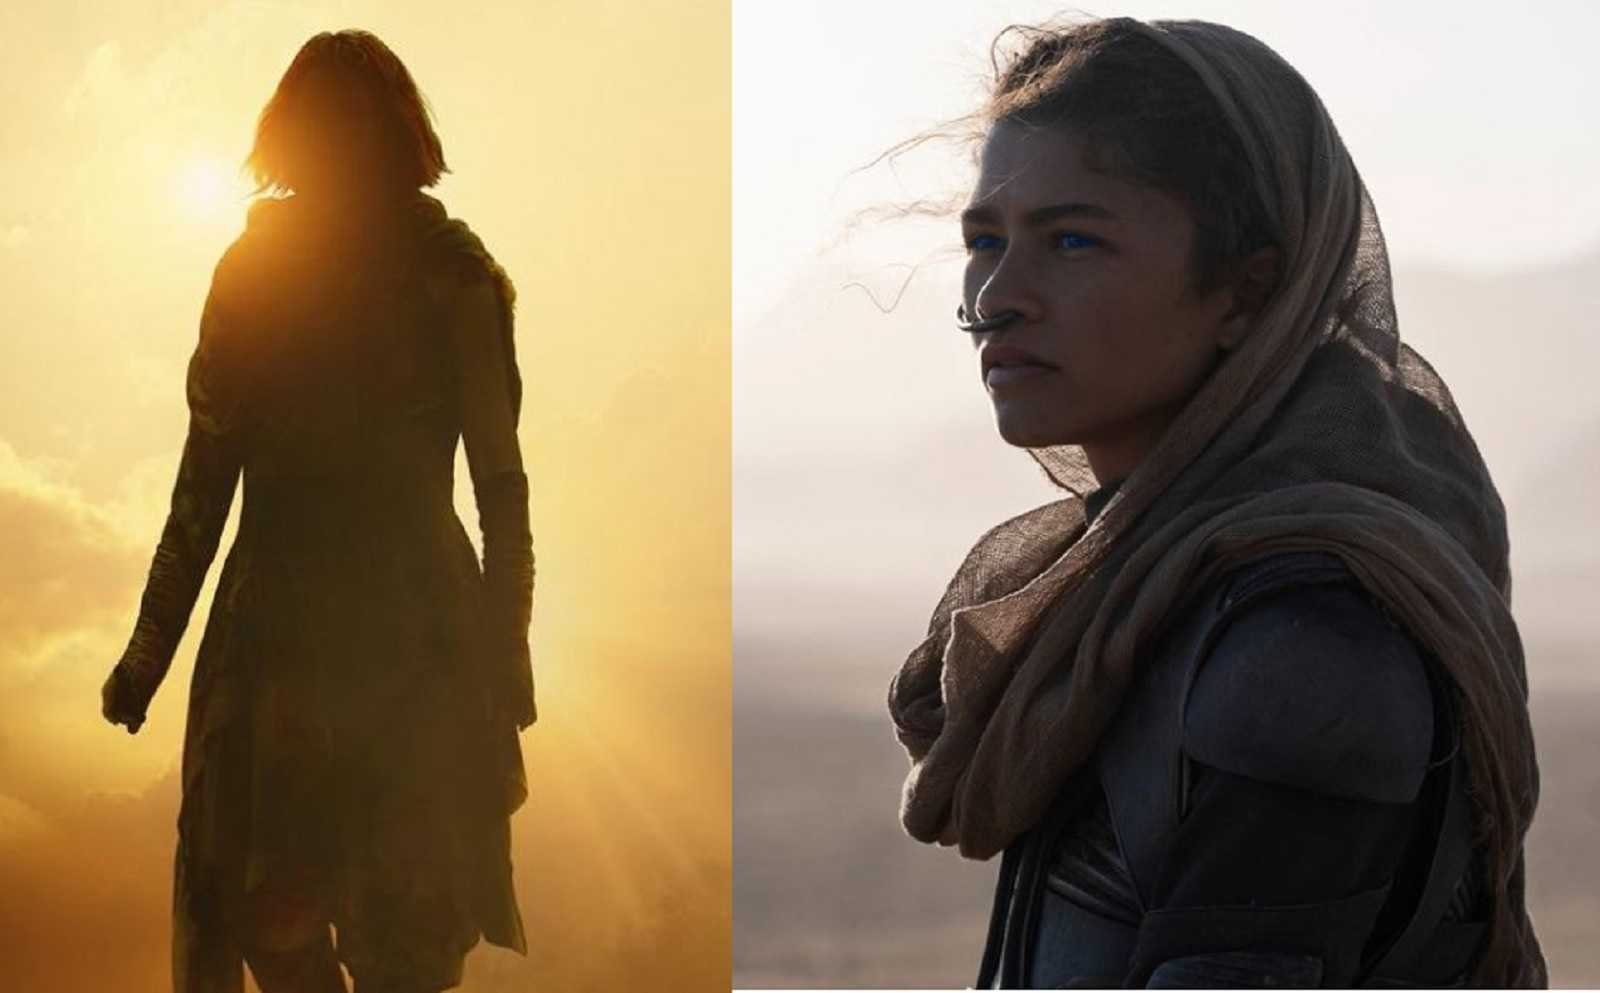 'Why does this look straight out of Dune?': Deepika Padukone's look from Project K reminds Twitterati of Zendaya starrer